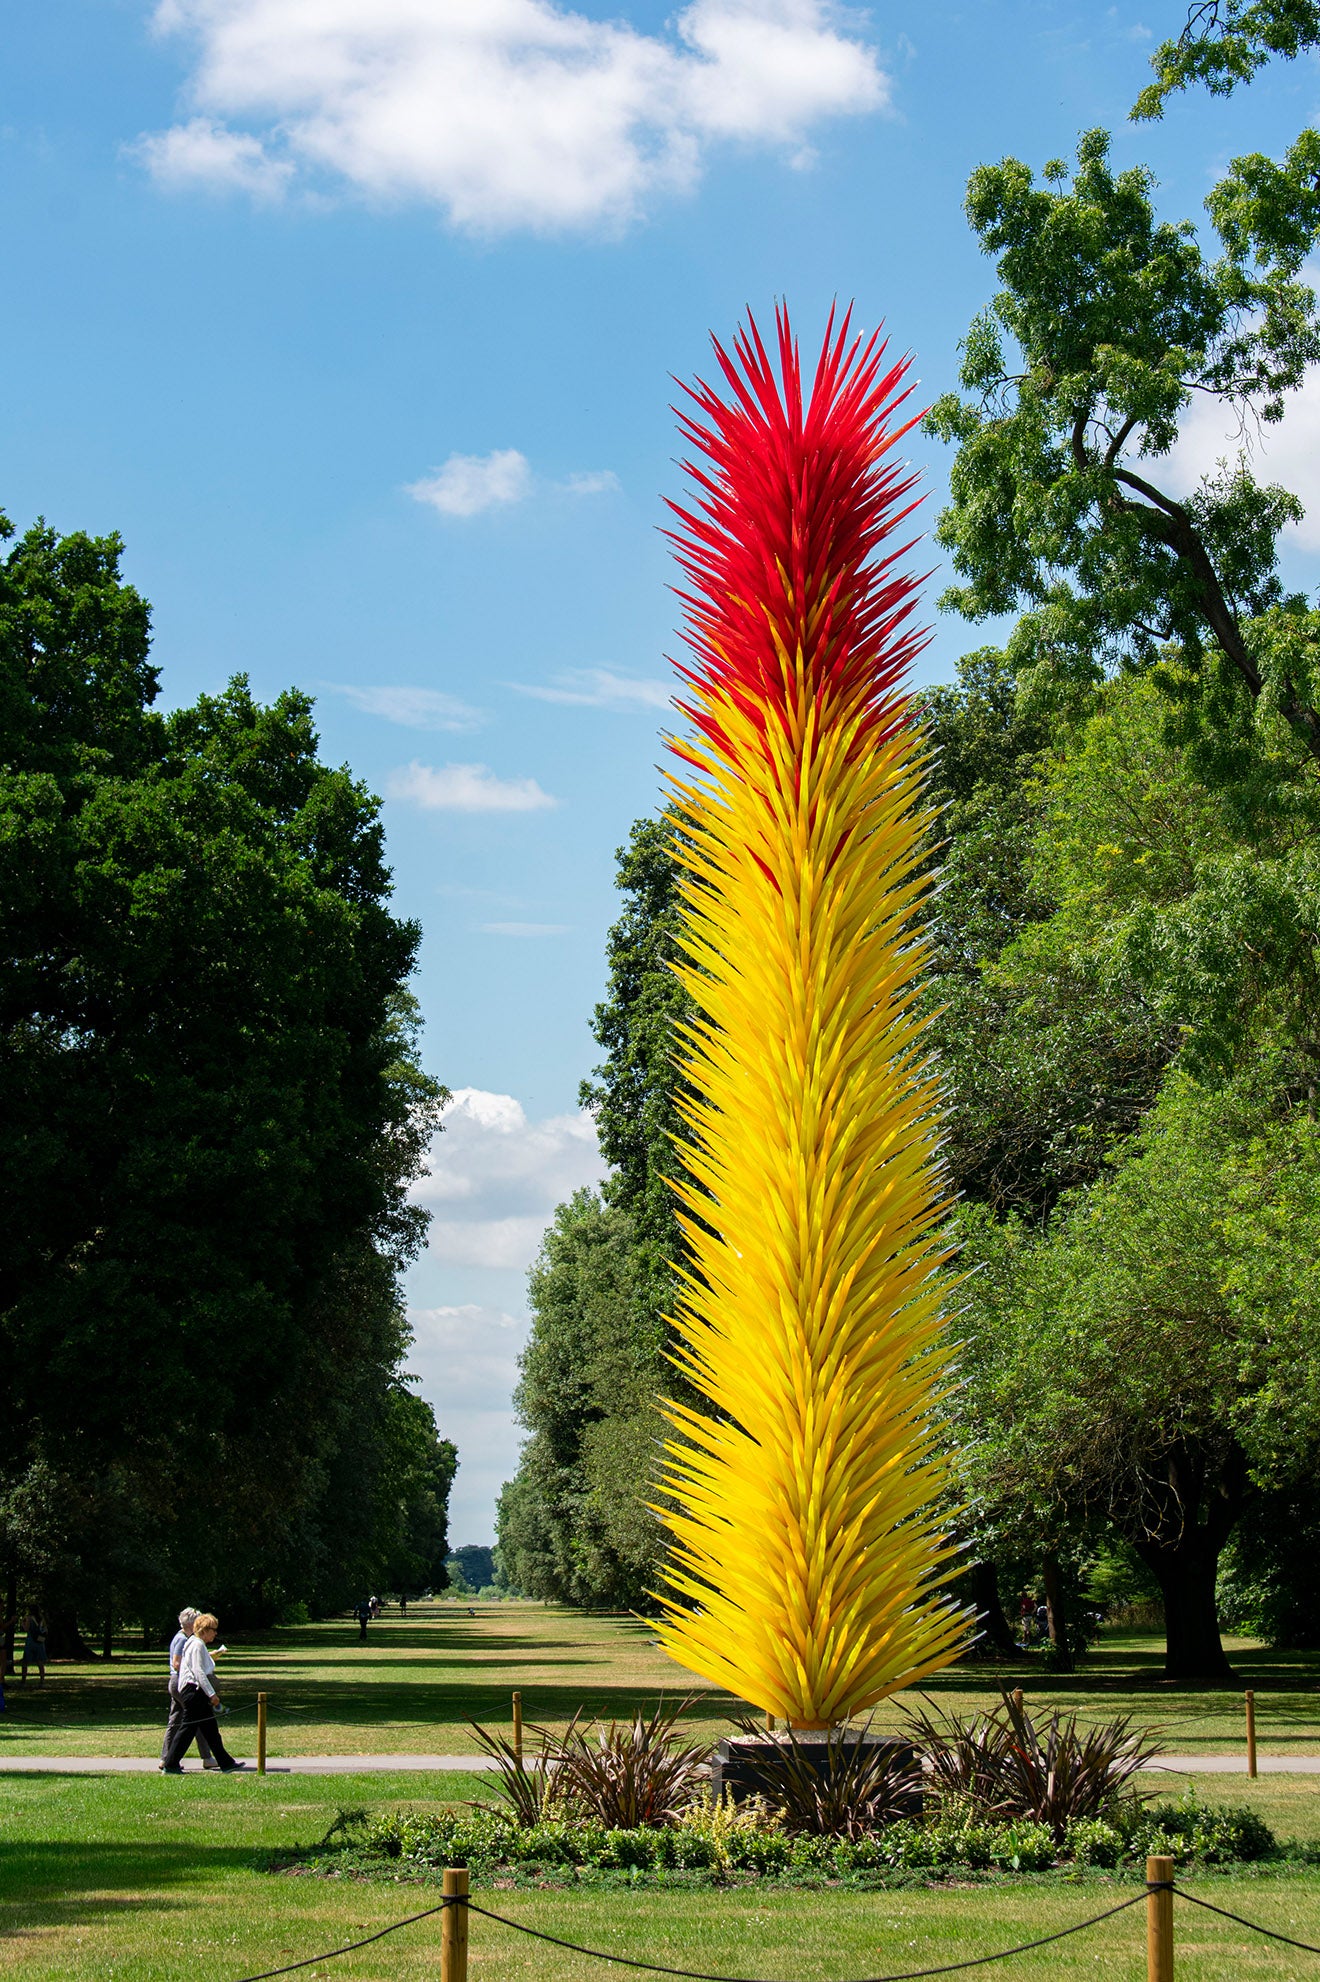 Chihuly: Reflections on nature at Kew Gardens